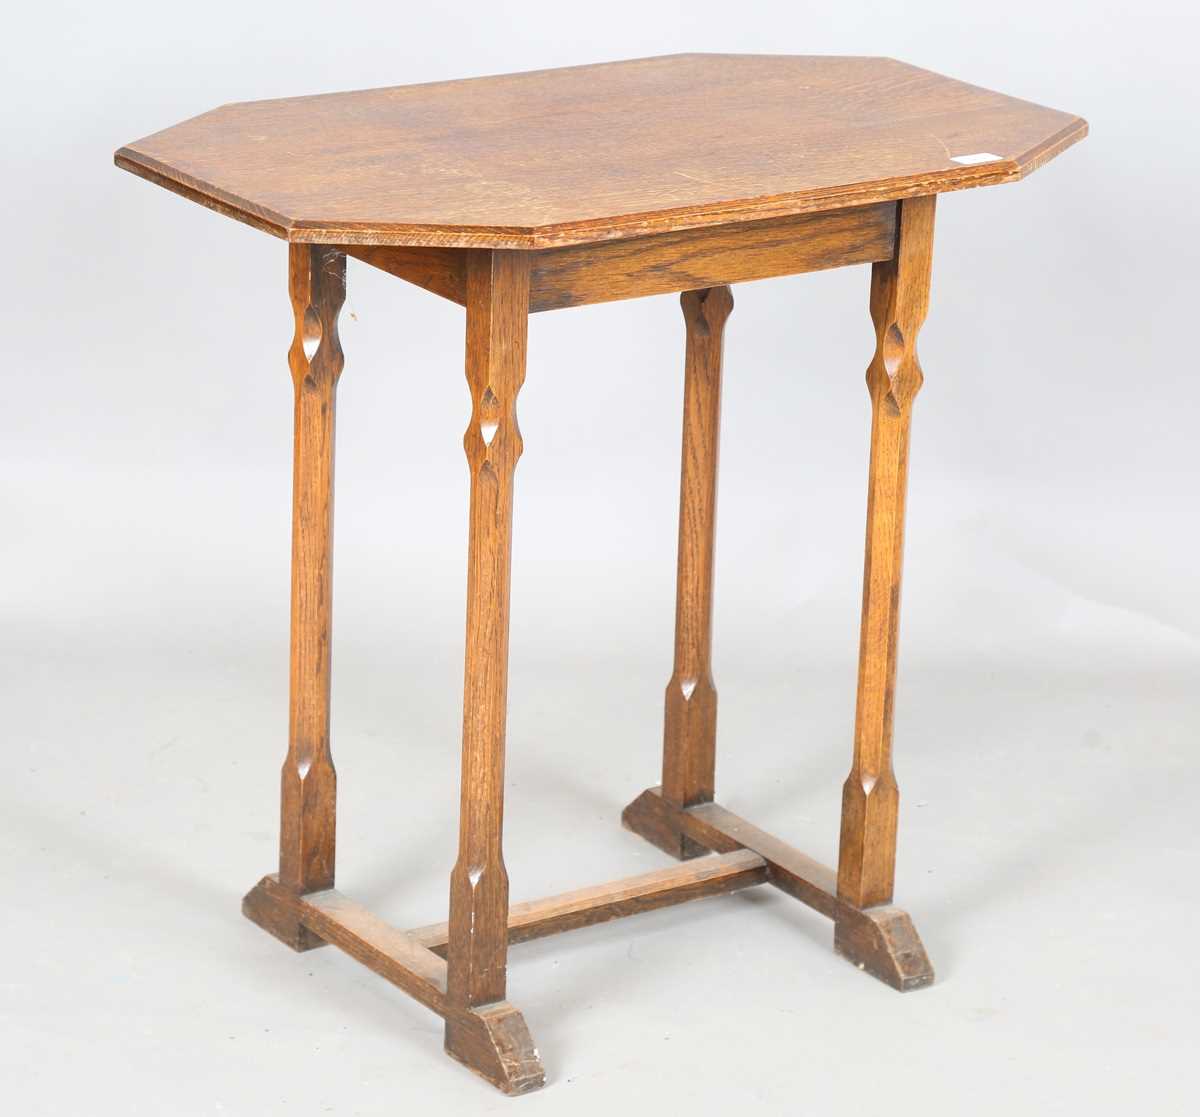 An early 20th century Arts and Crafts style oak canted rectangular occasional table, raised on